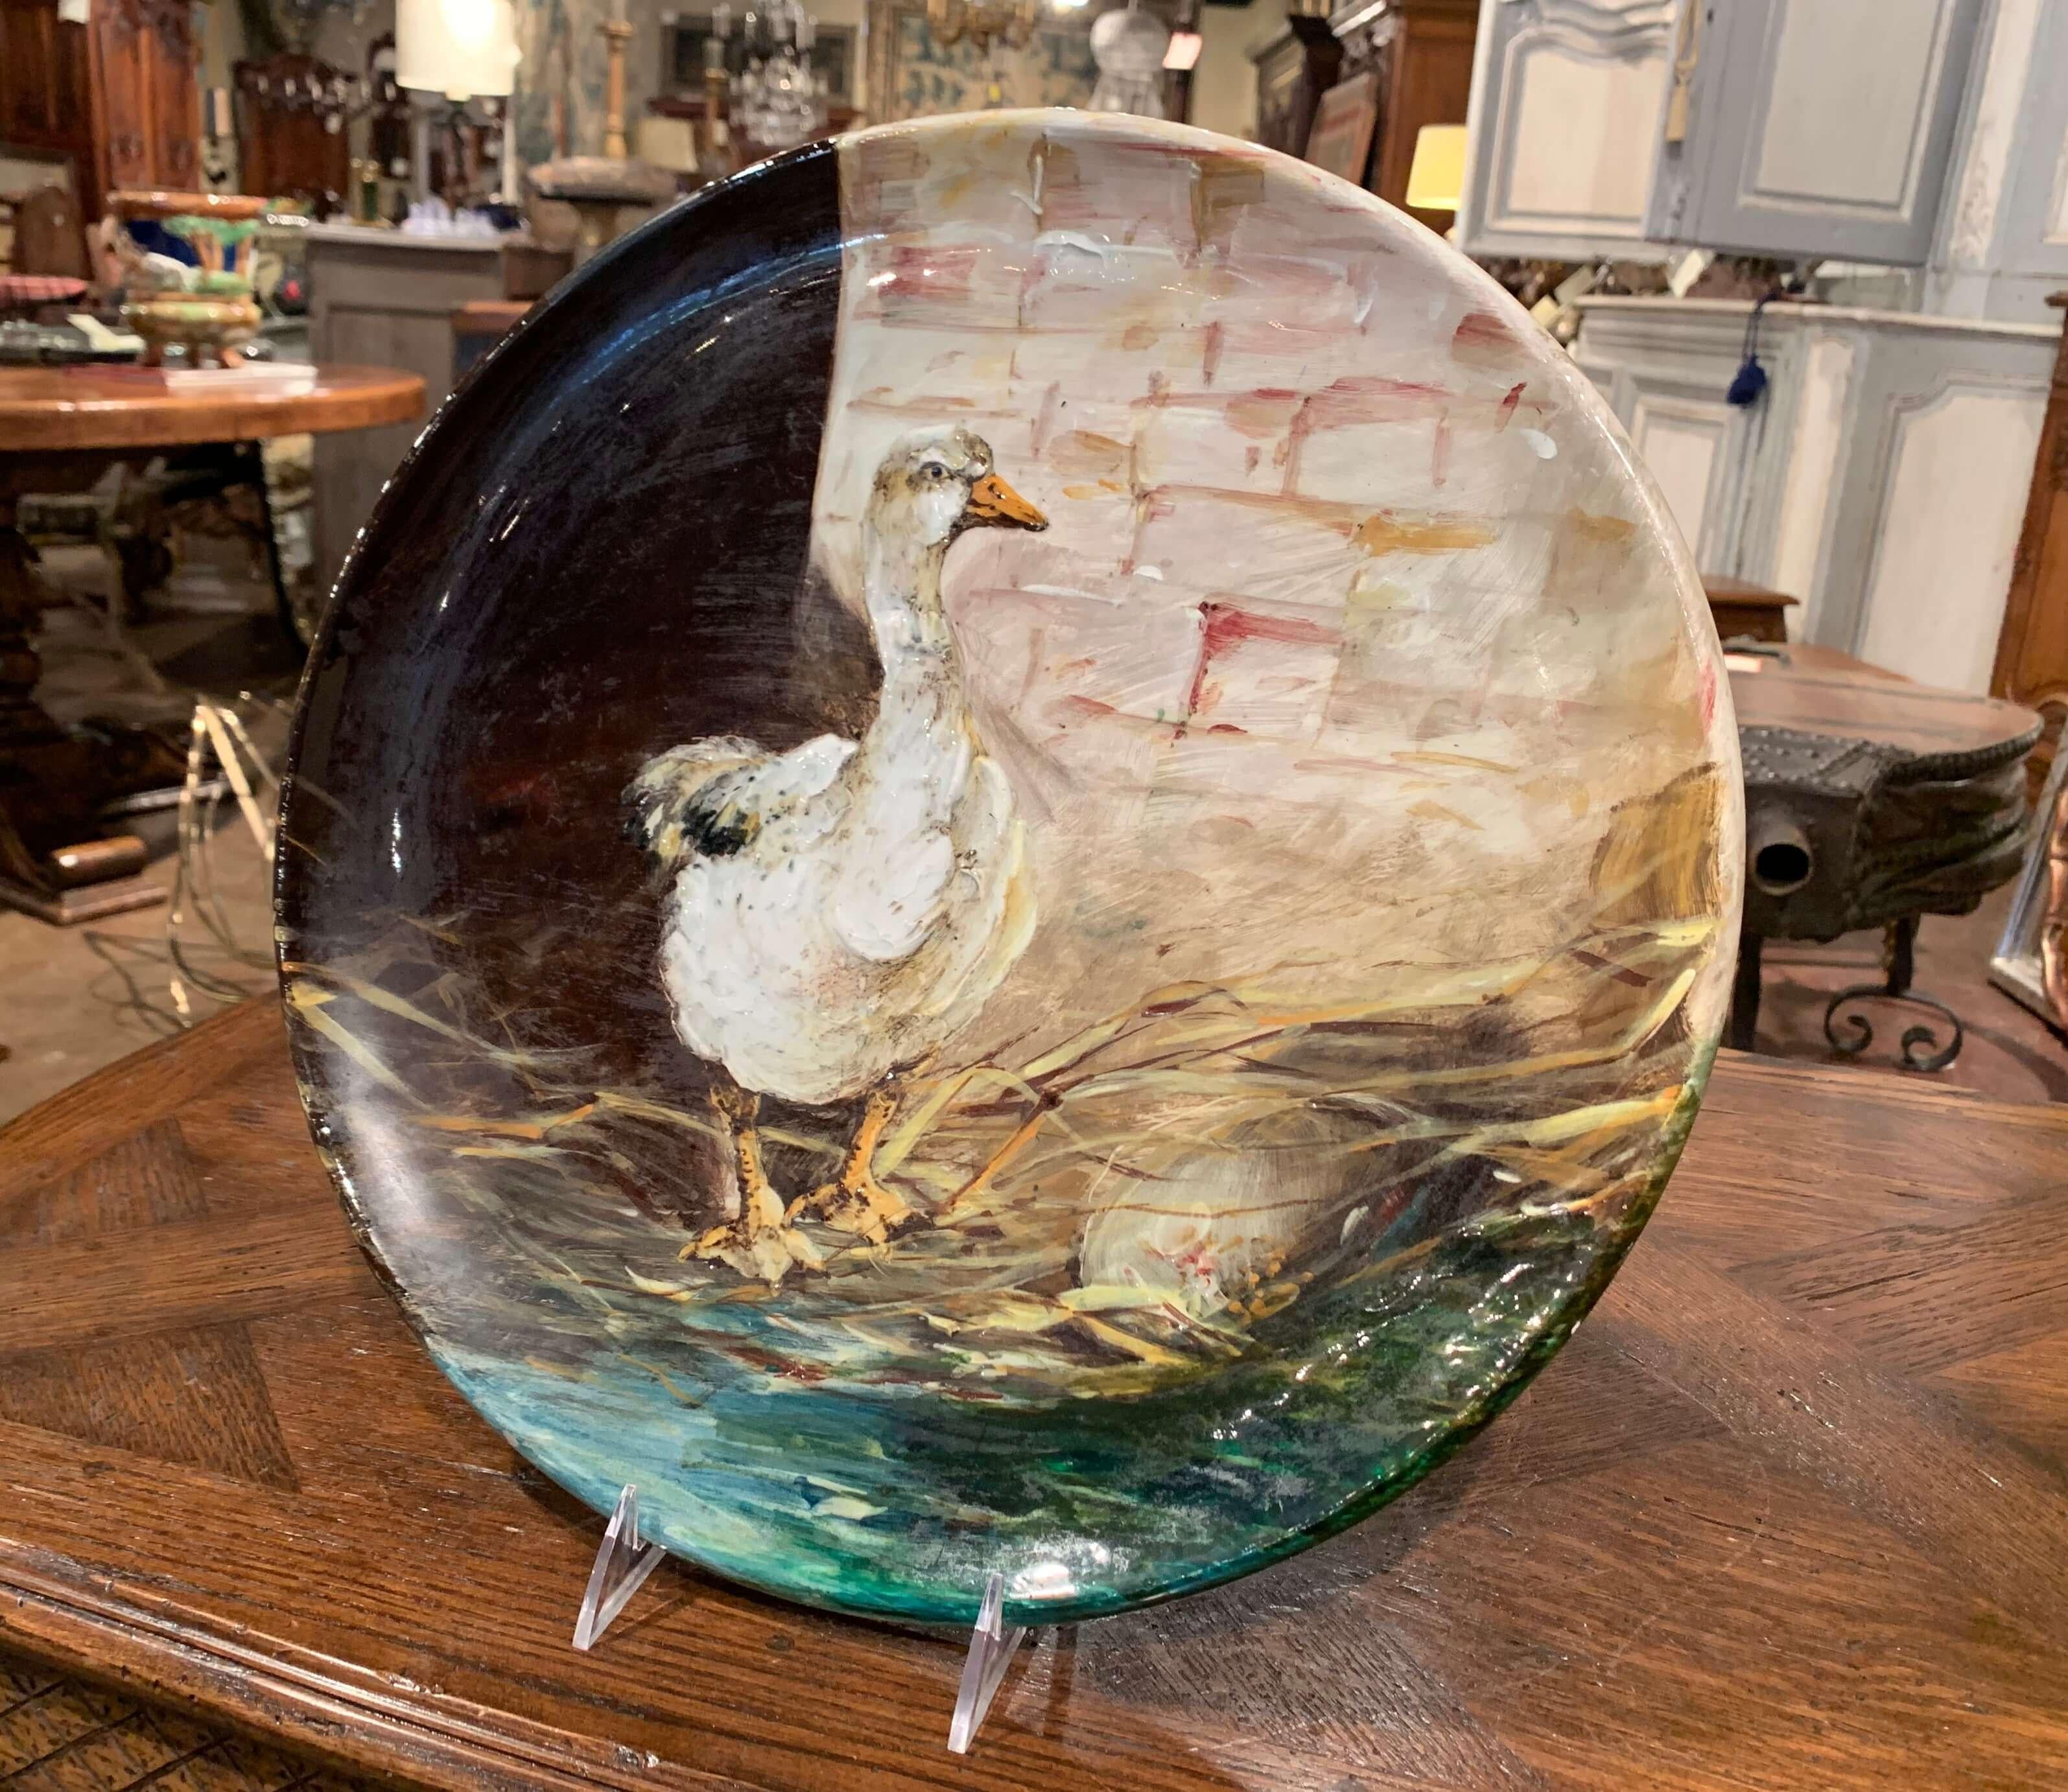 This elegant Majolica platter was created in Southern France by Massier, circa 1890. Round in shape, the antique ceramic plate is beautifully hand painted featuring a standing duck in a barn. The planter is in excellent condition with rich colors in